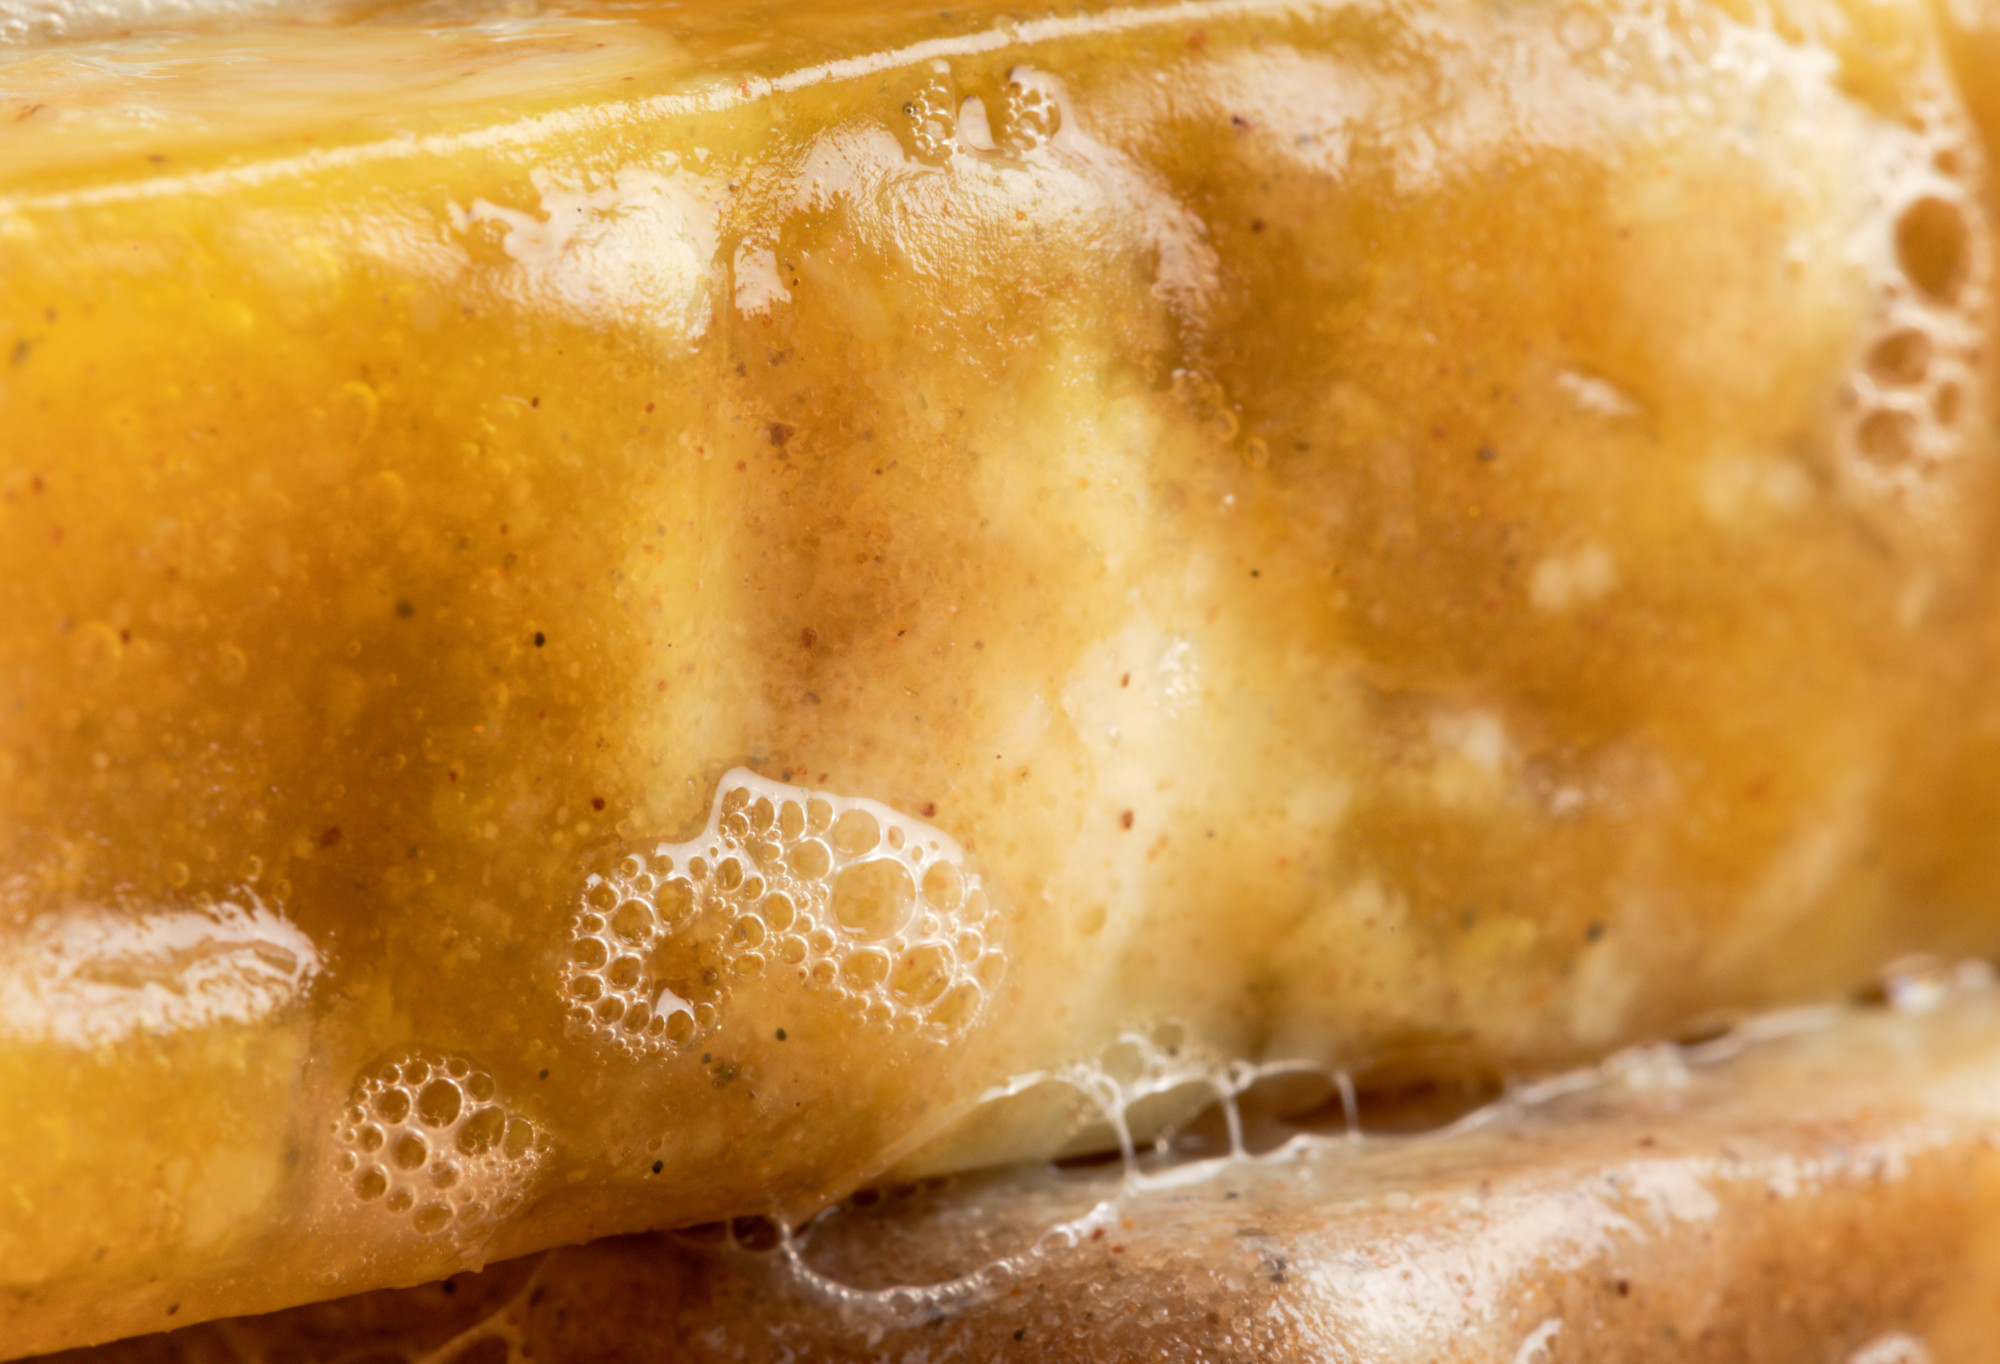 A bubbly close-up of Sandstone: a sandy yellow coloured soap, with a roughly textured surface created by sand.